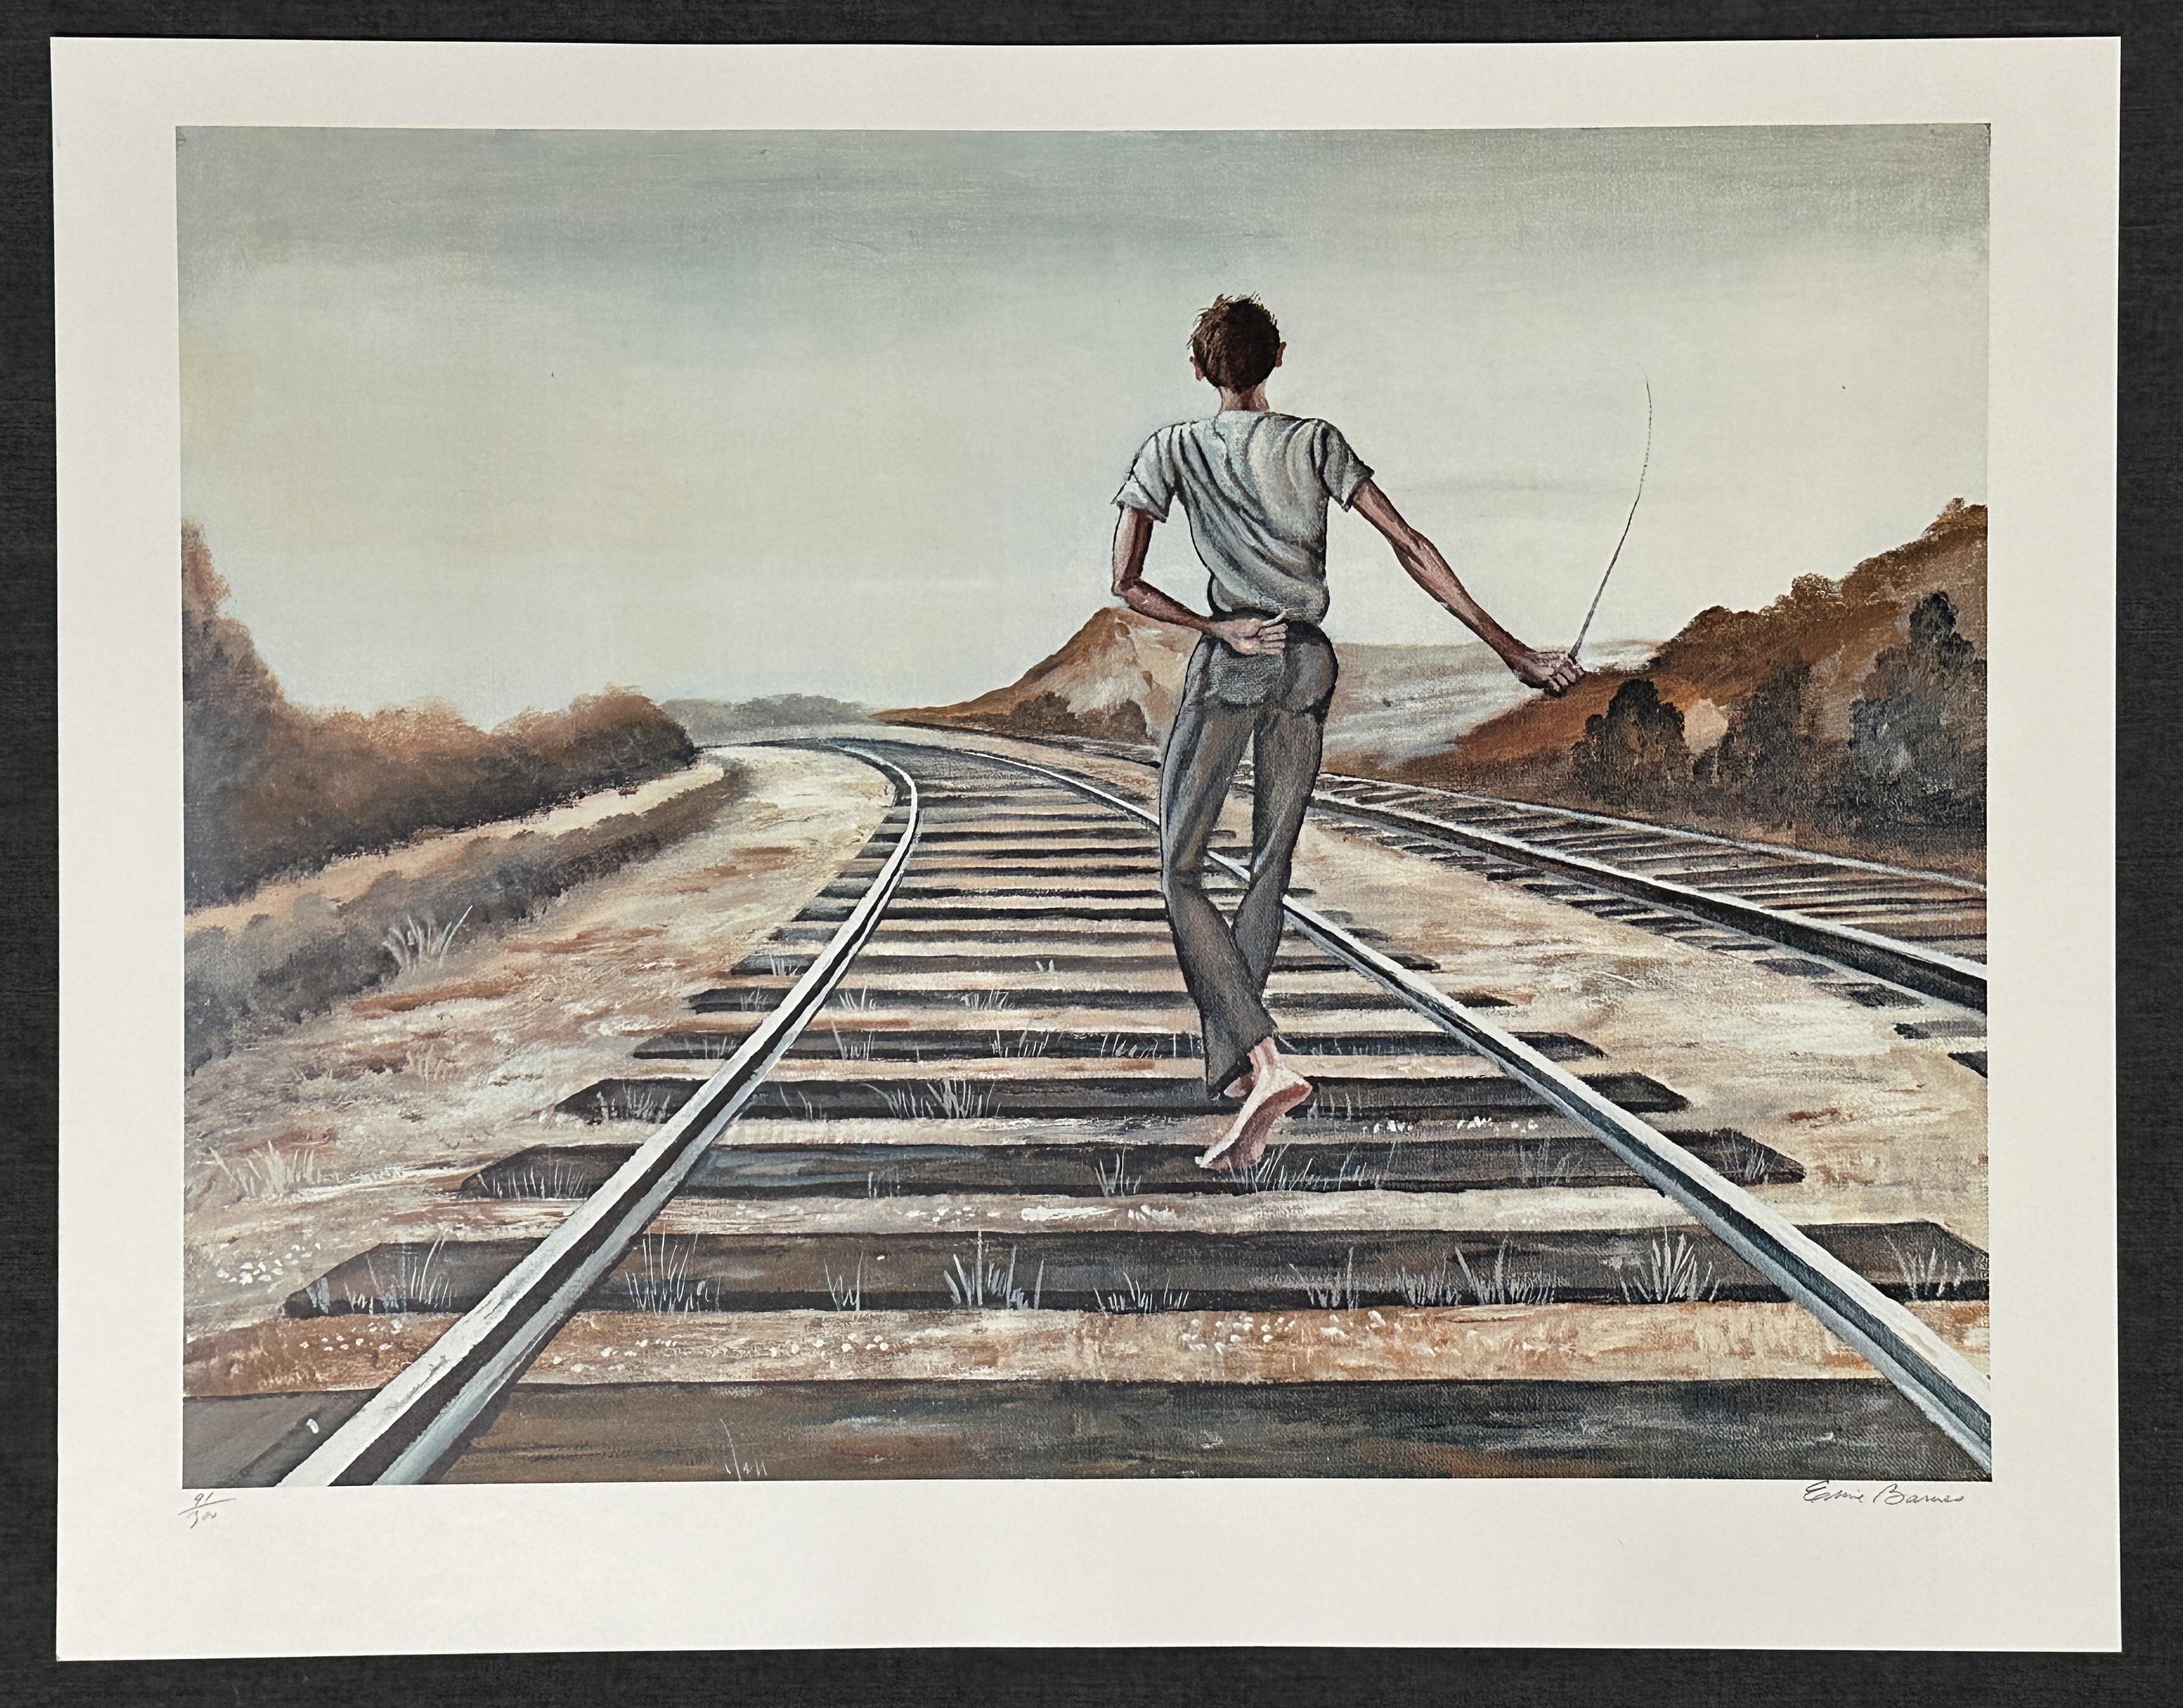 Destination Unknown 1979 Signed Limited Edition Lithograph  - Print by Ernie Barnes